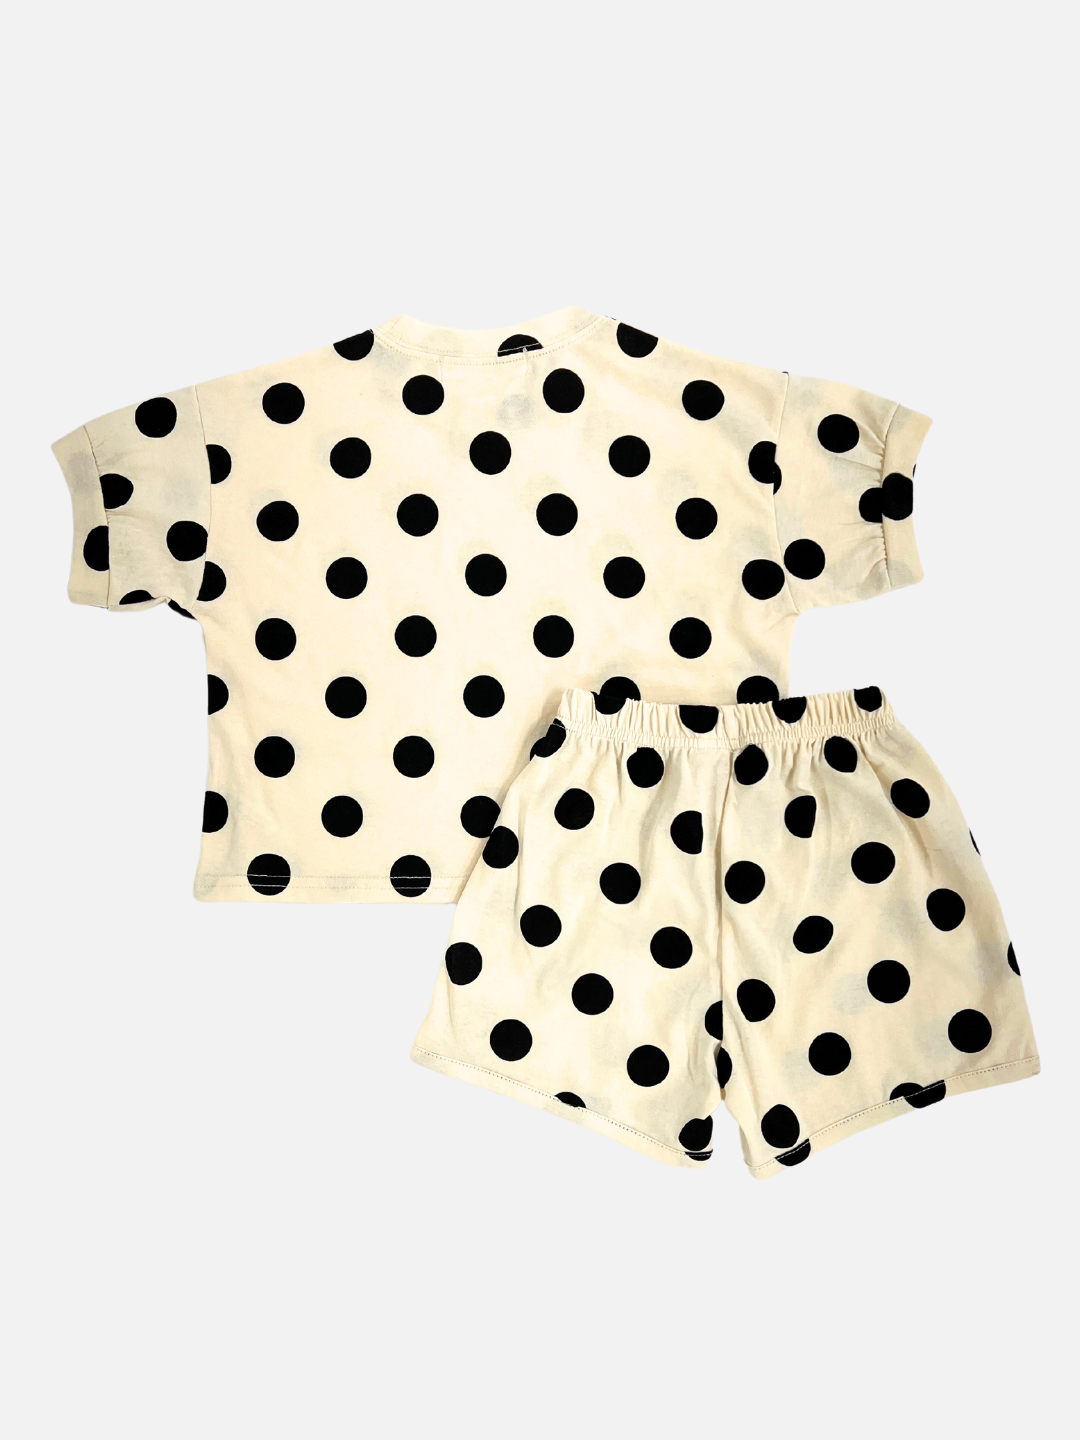 Black |  A kids' tee shirt and shorts set in a pattern of white dots on an ecru background, back view